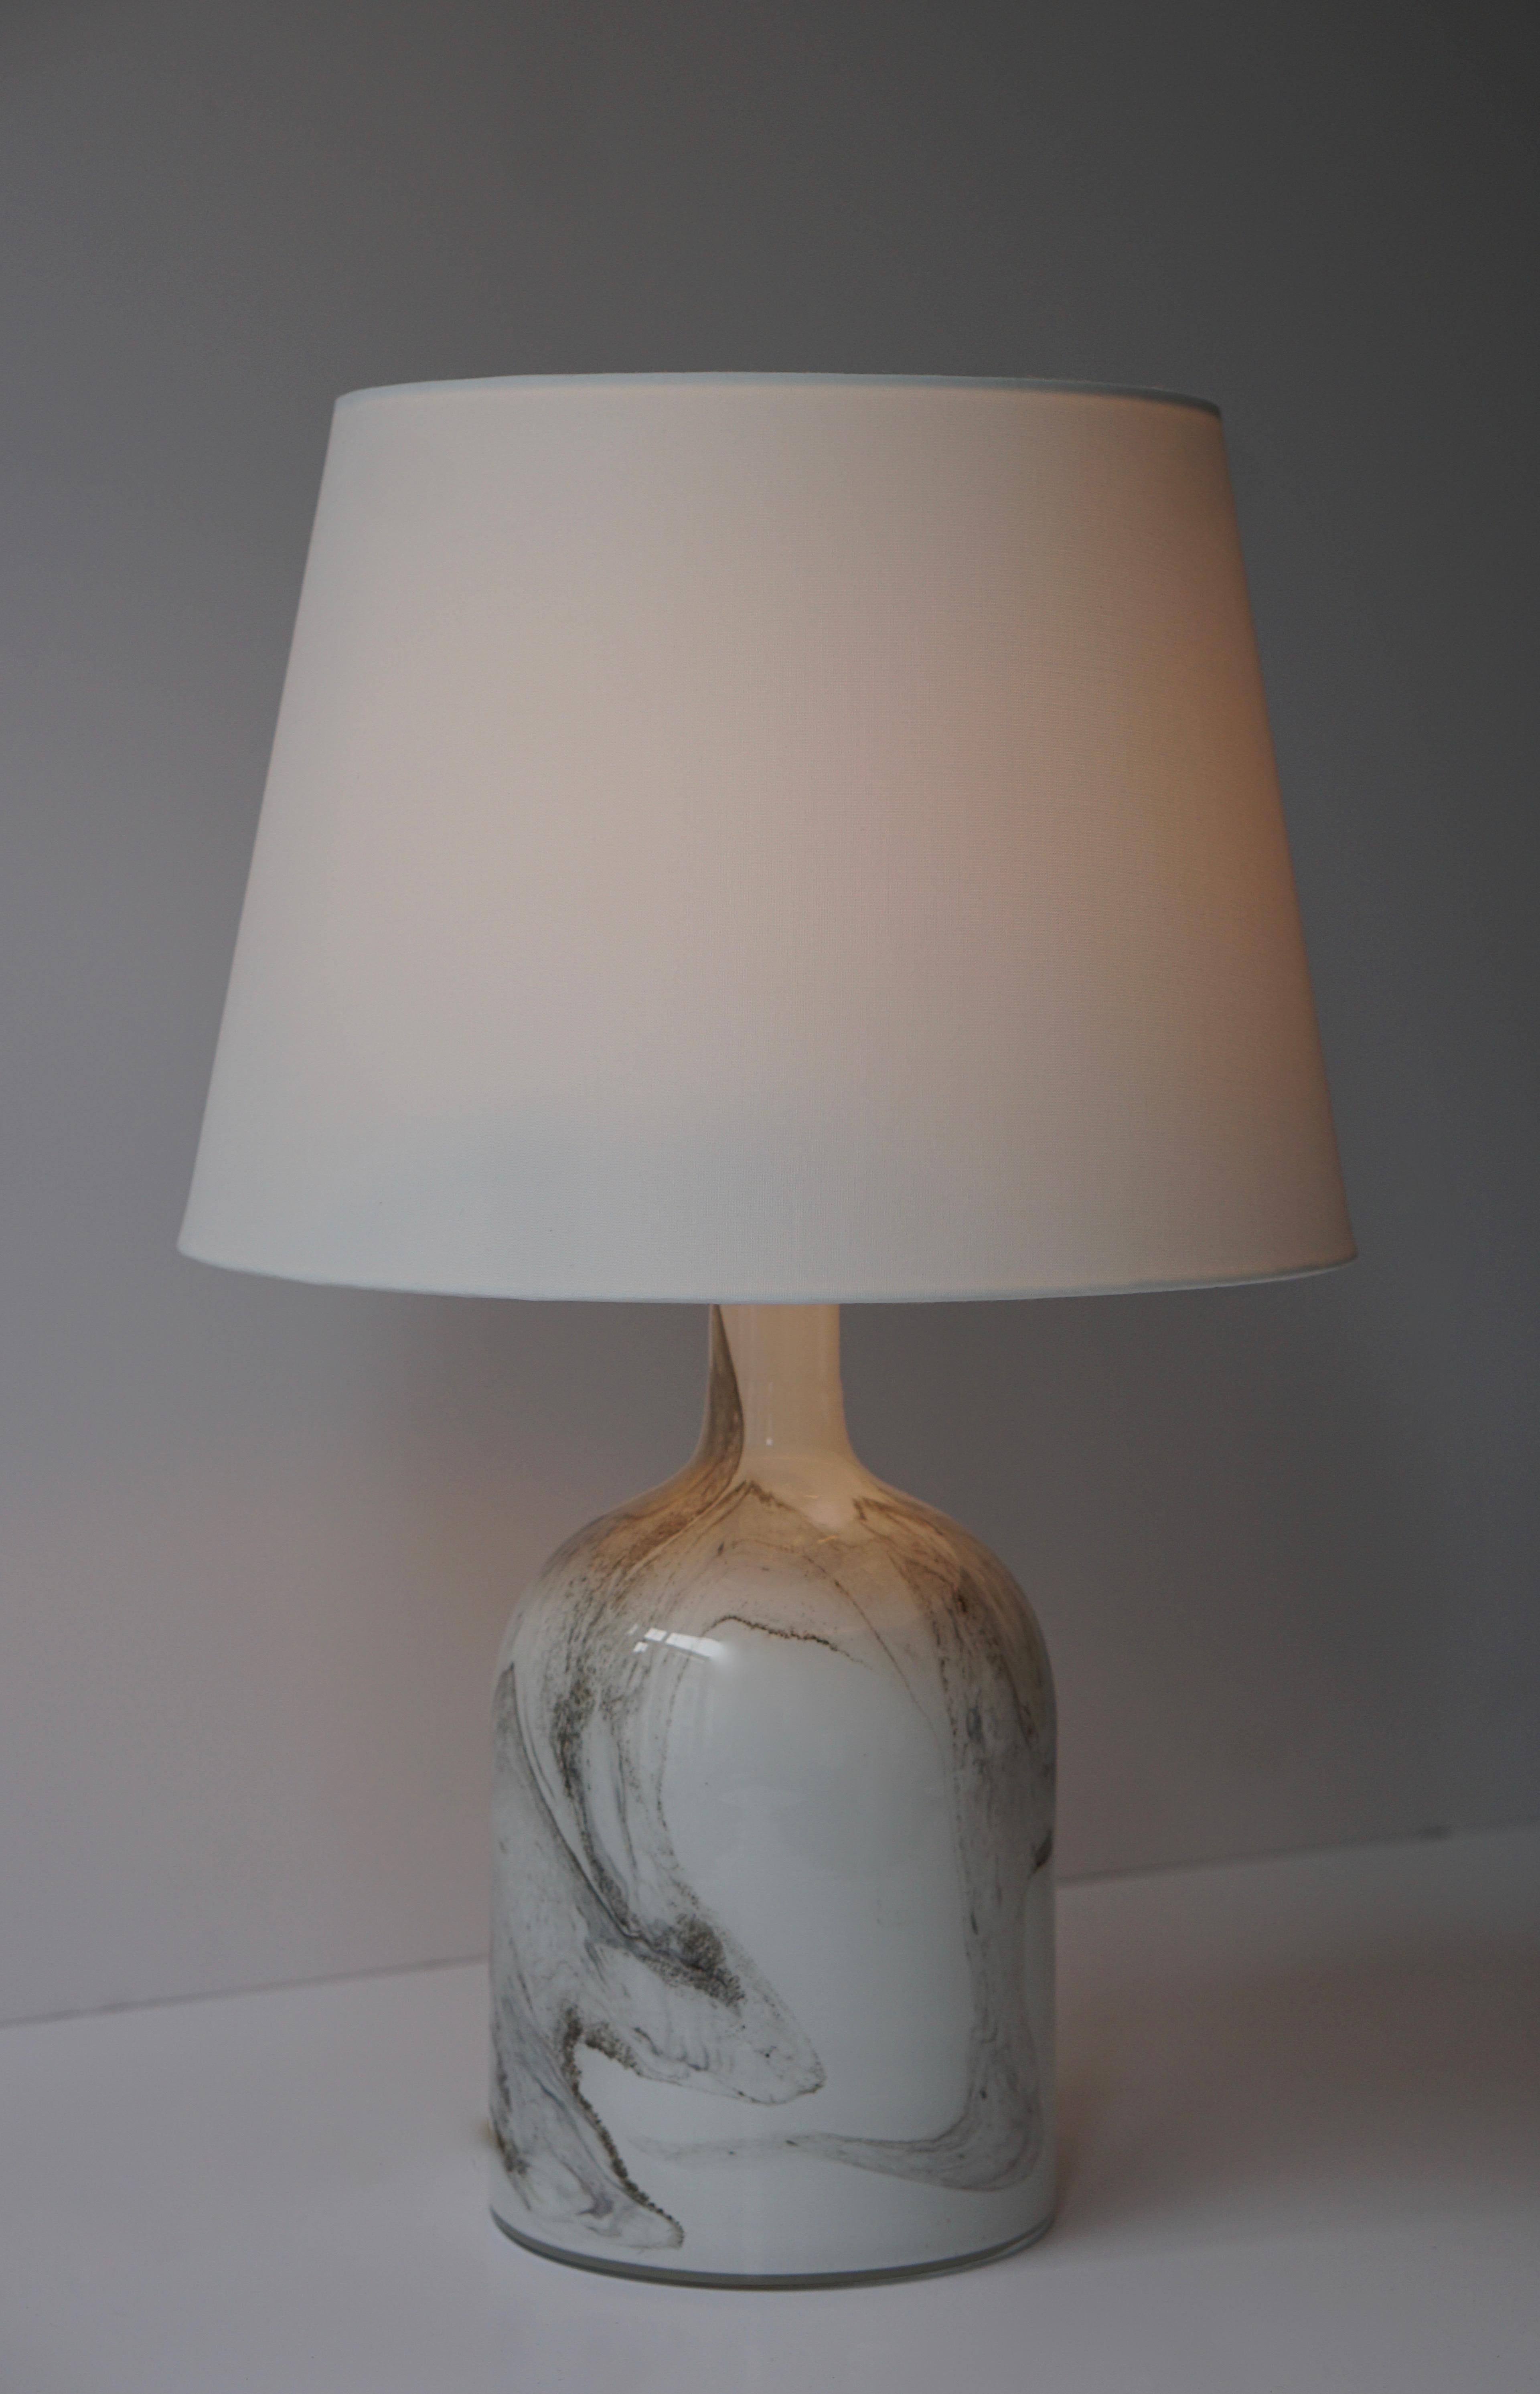 Large Holmegaard lamp with brushed steel fitting by Holmegaard, Denmark, 1984 in white and gray with glass melt under laying the smooth clear glass designed by Michael Bang 1984. The glass is thick heavy quality of timeless beautiful craftwork by